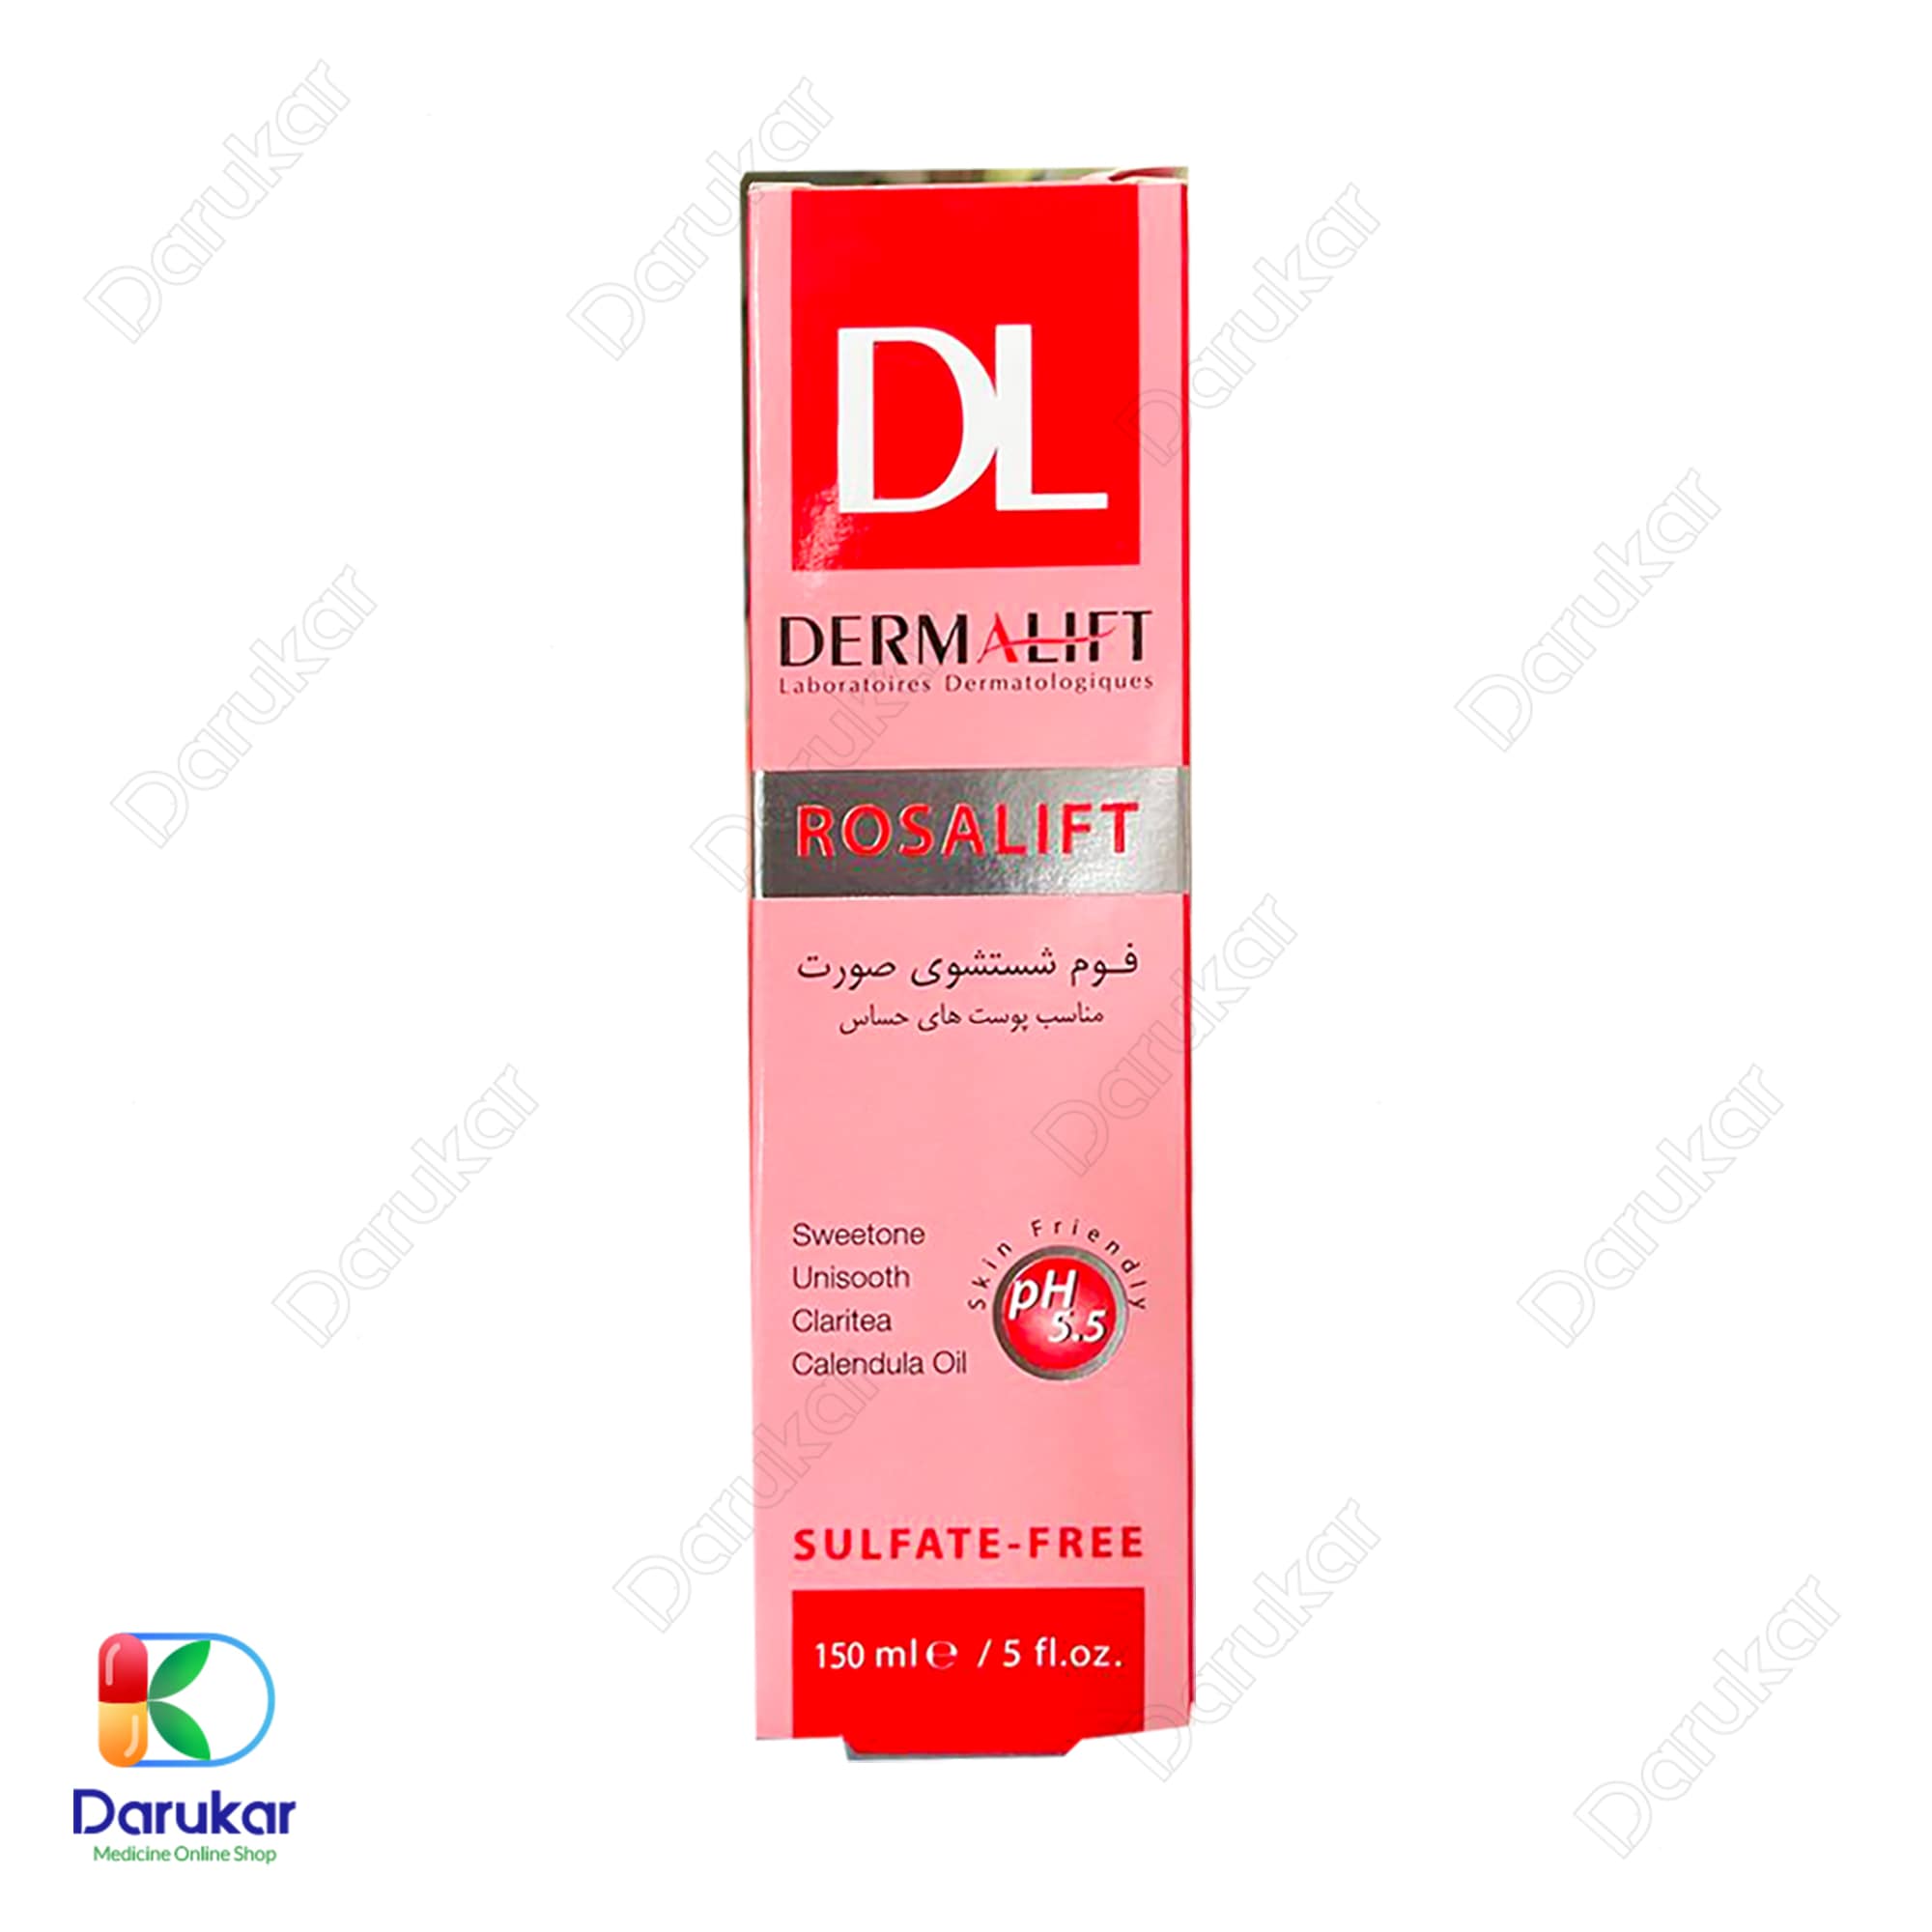 Dermalift Rosalift Cleaning Syndet Foam for Sensitive and Atopic Skin 4